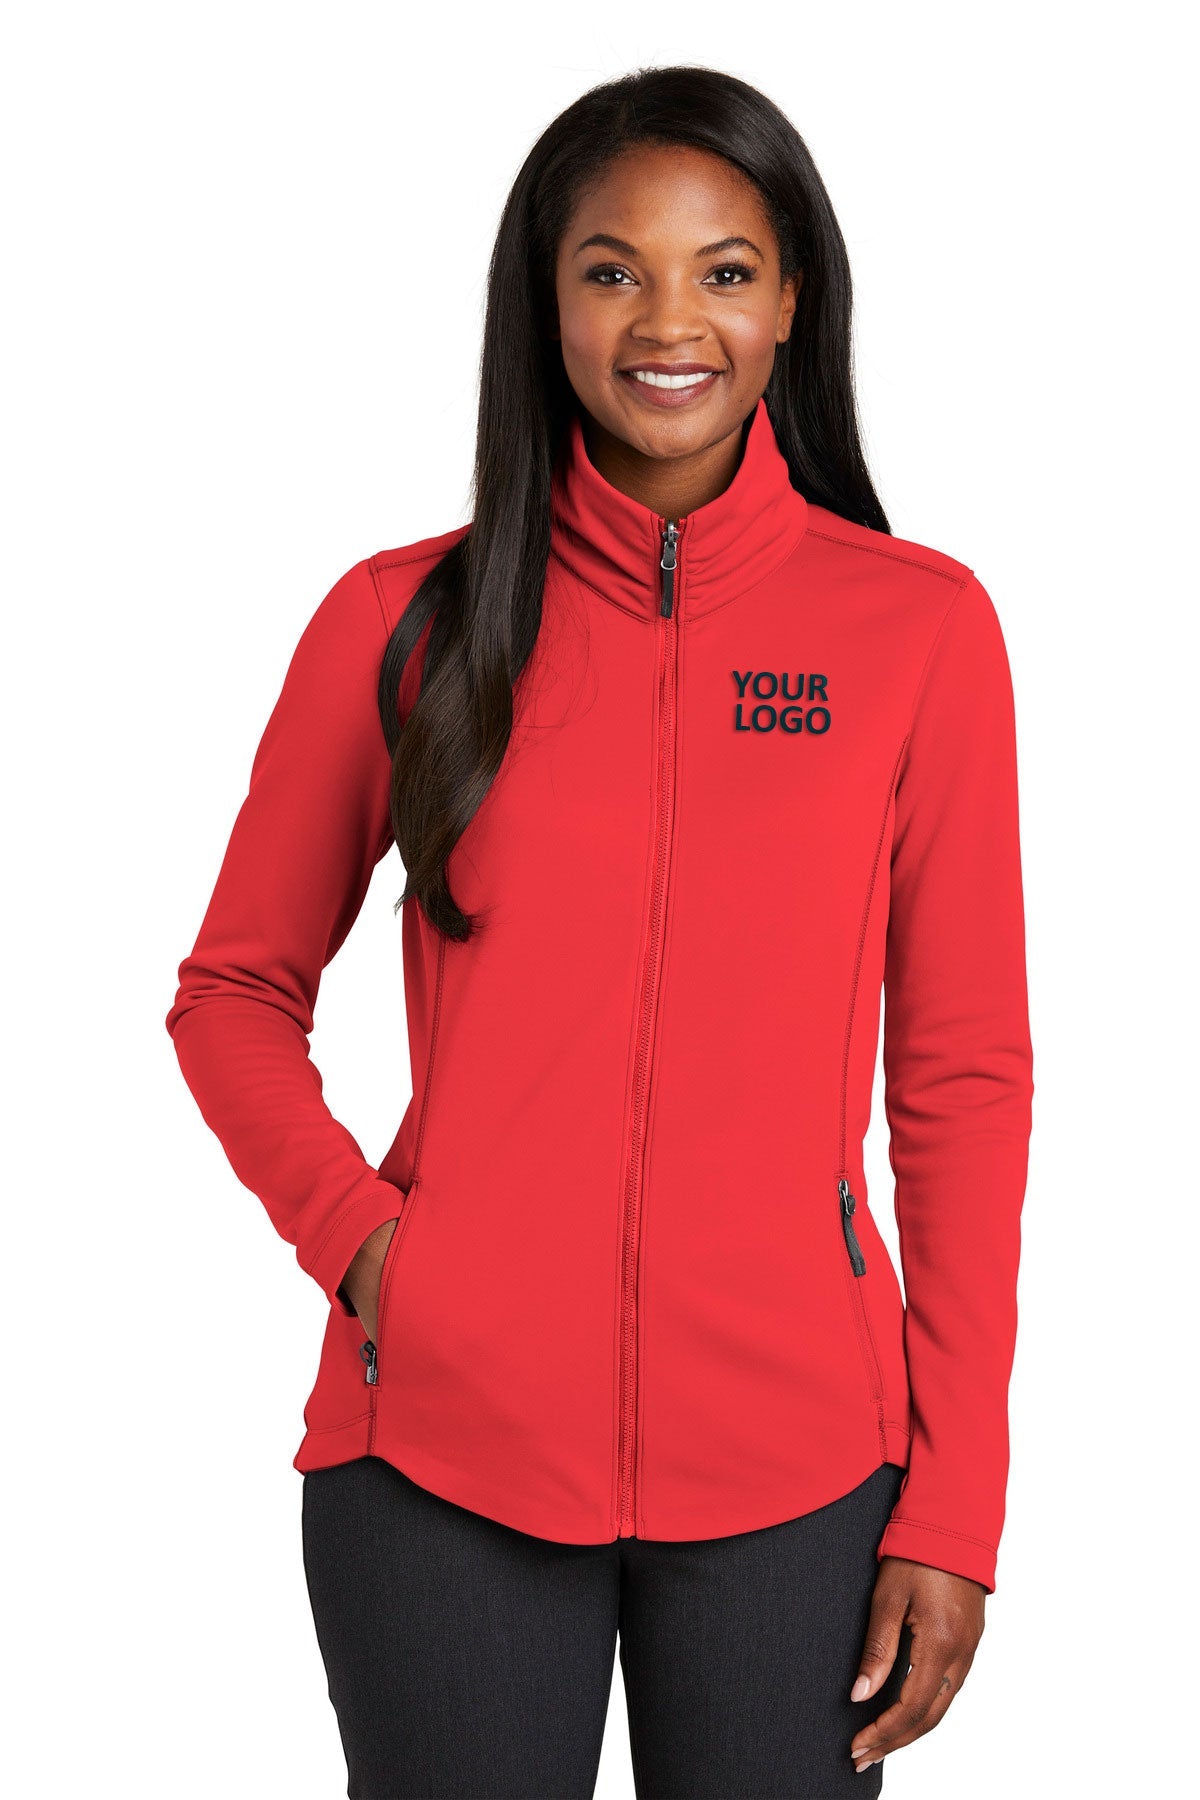 Port Authority Red Pepper L904 business logo jackets